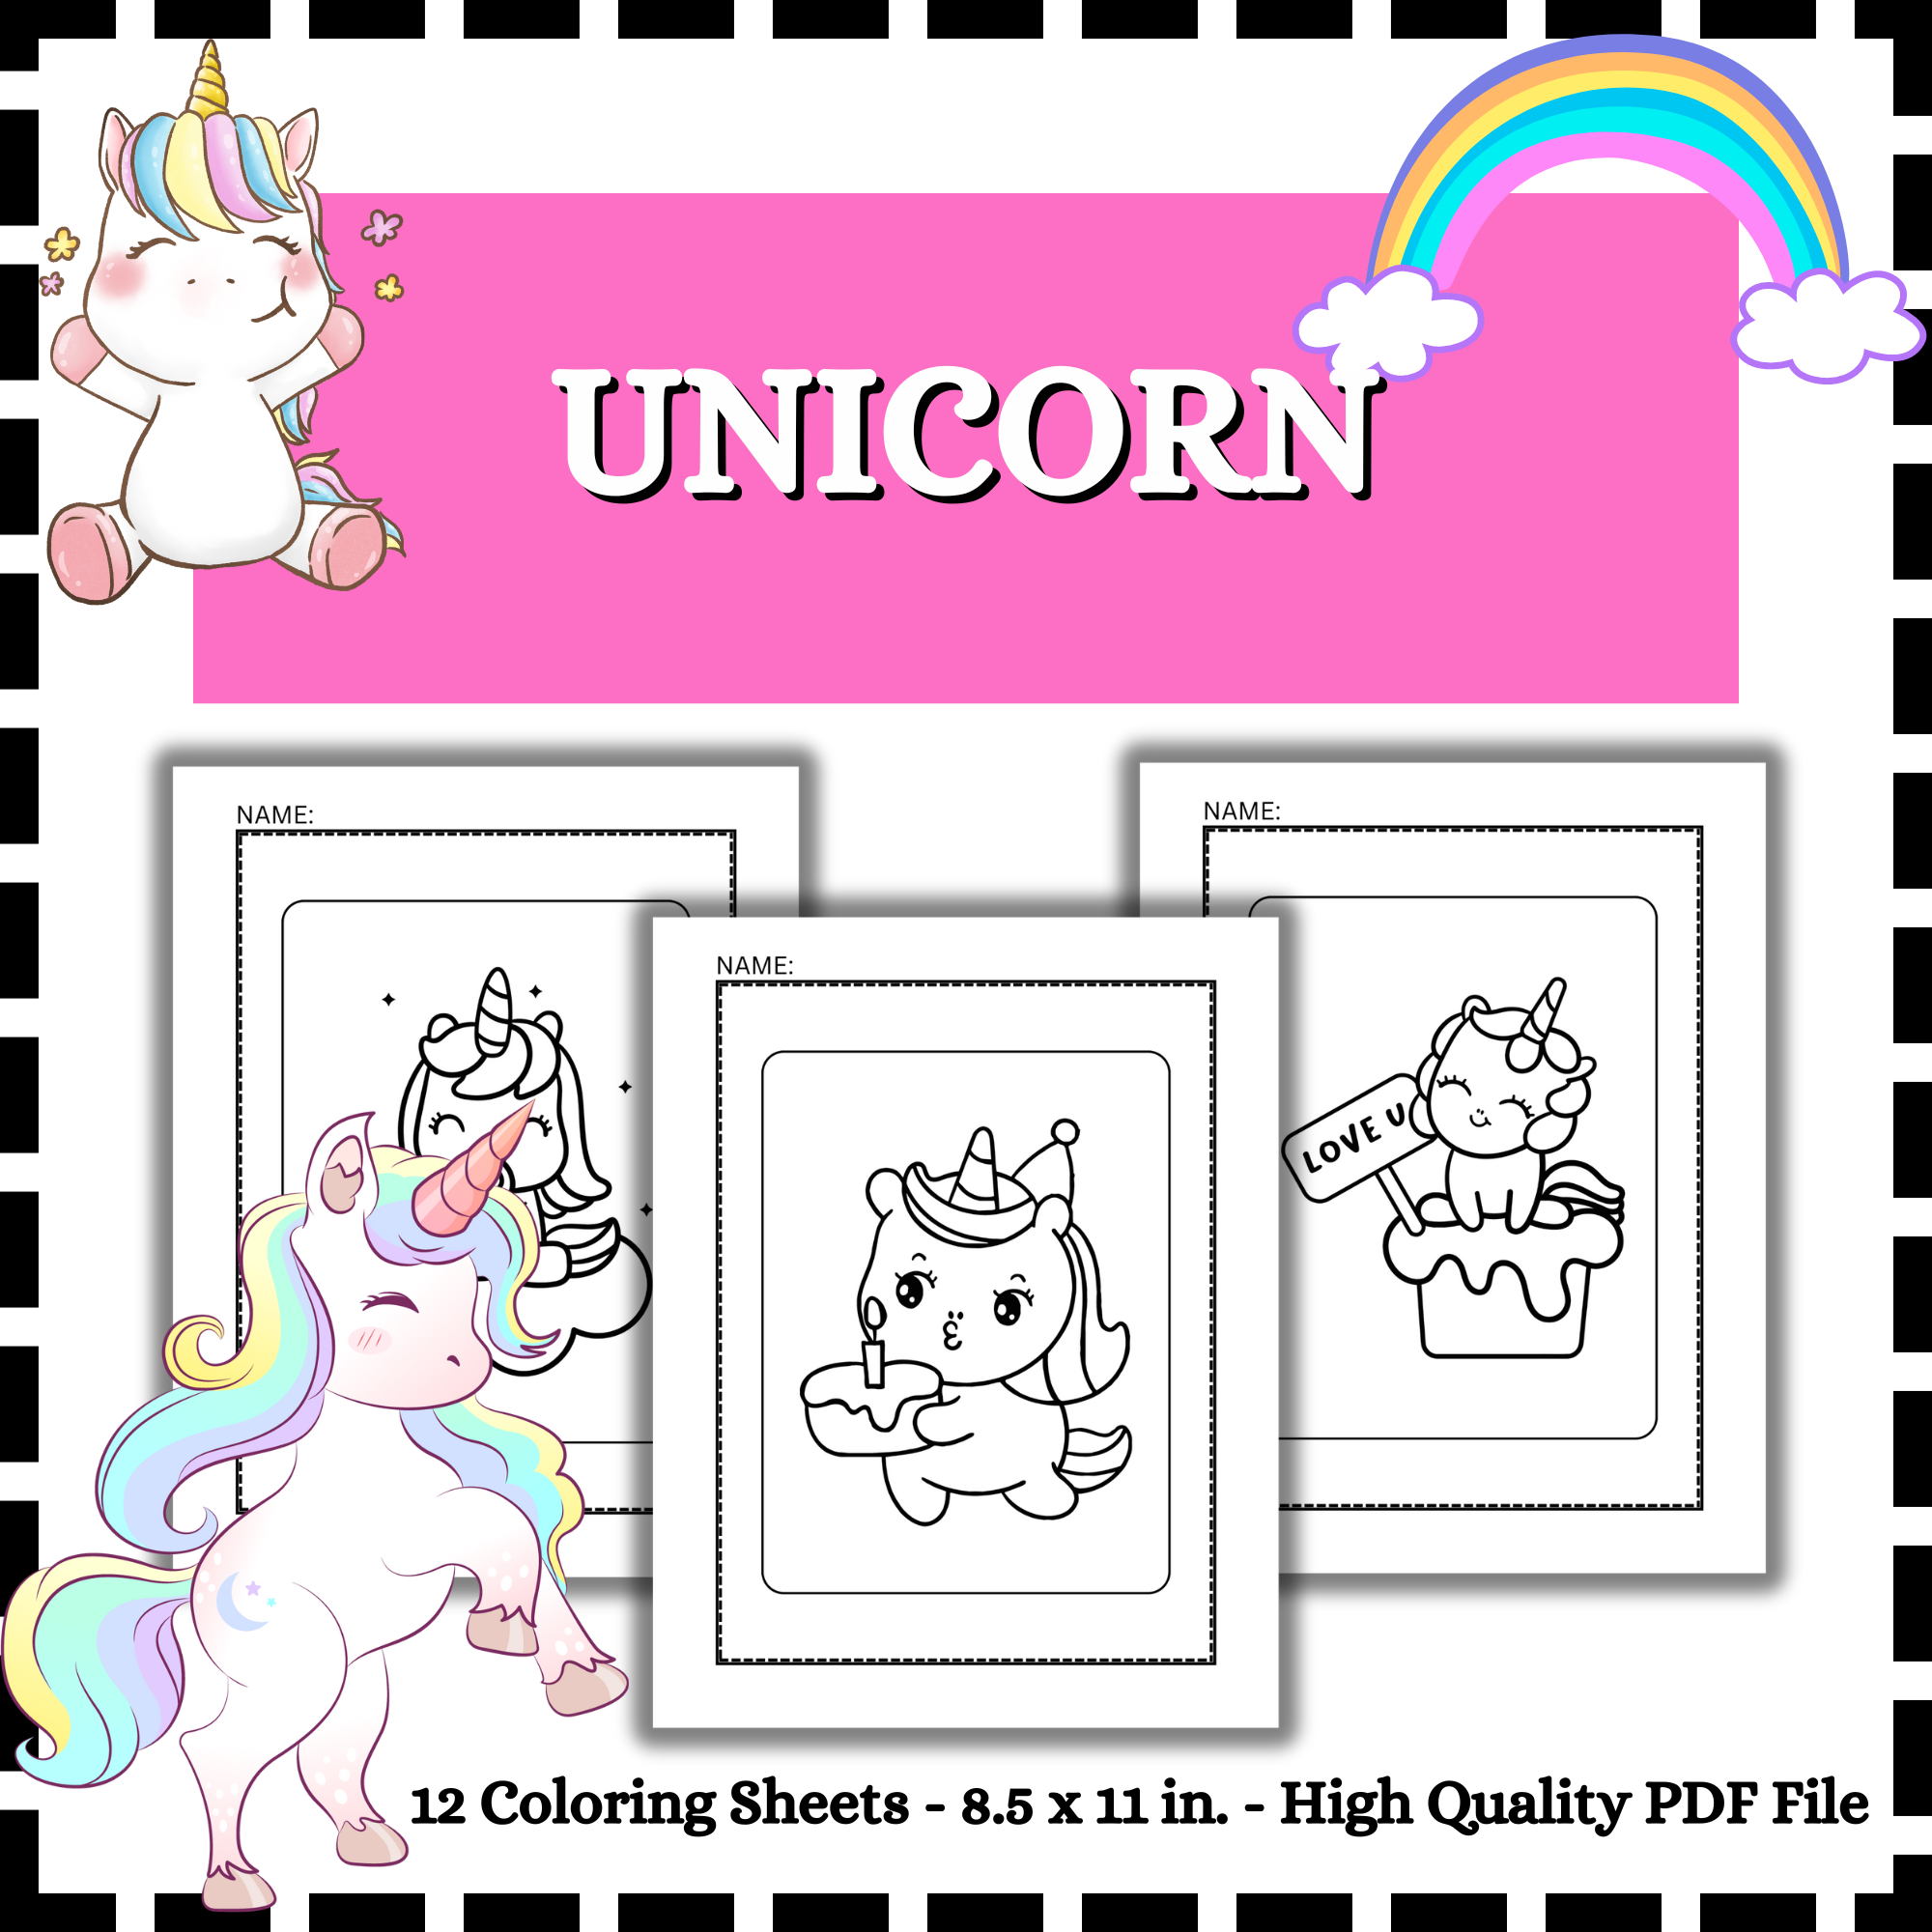 Unicorn coloring sheets summer back to school coloring pages made by teachers